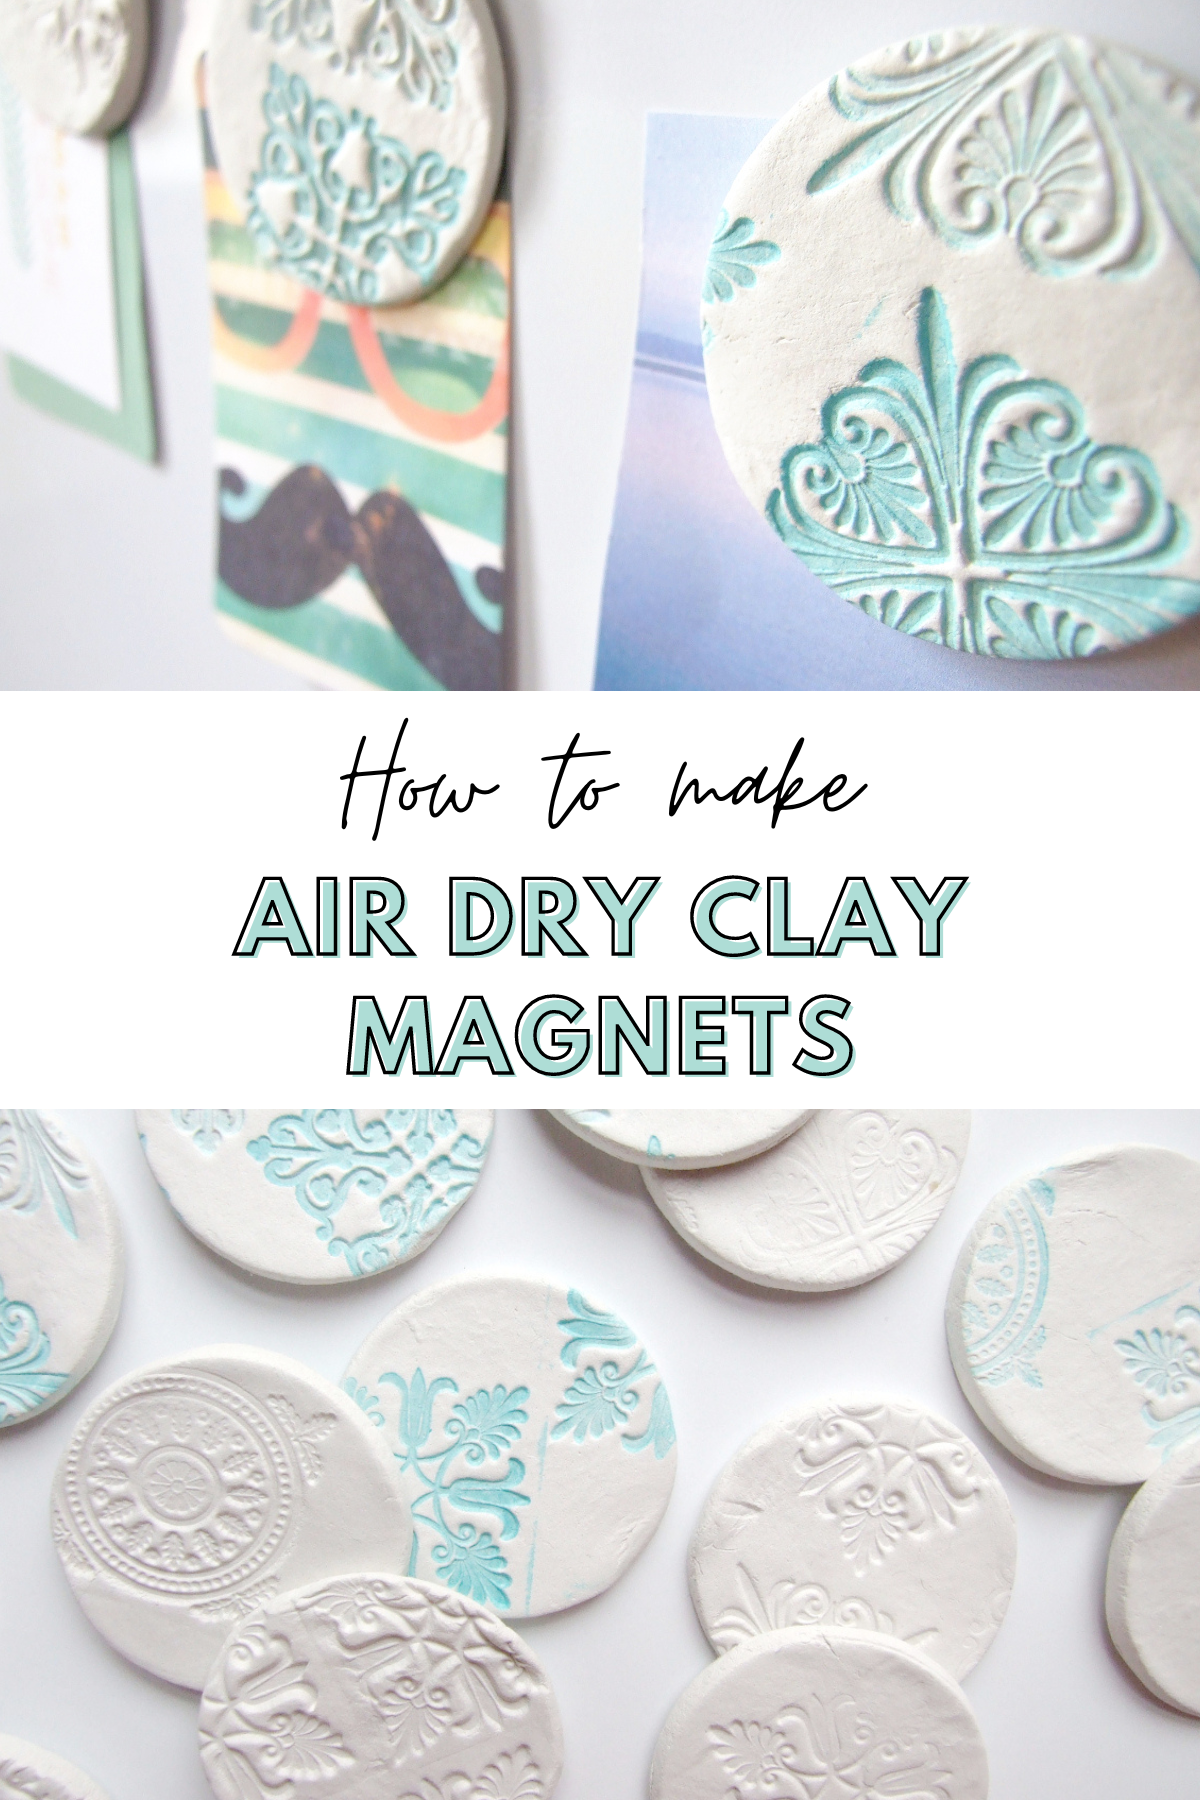 30+ Best Air Dry Clay Ideas & Craft Projects  Clay crafts air dry, Air dry  clay, Air dry clay projects